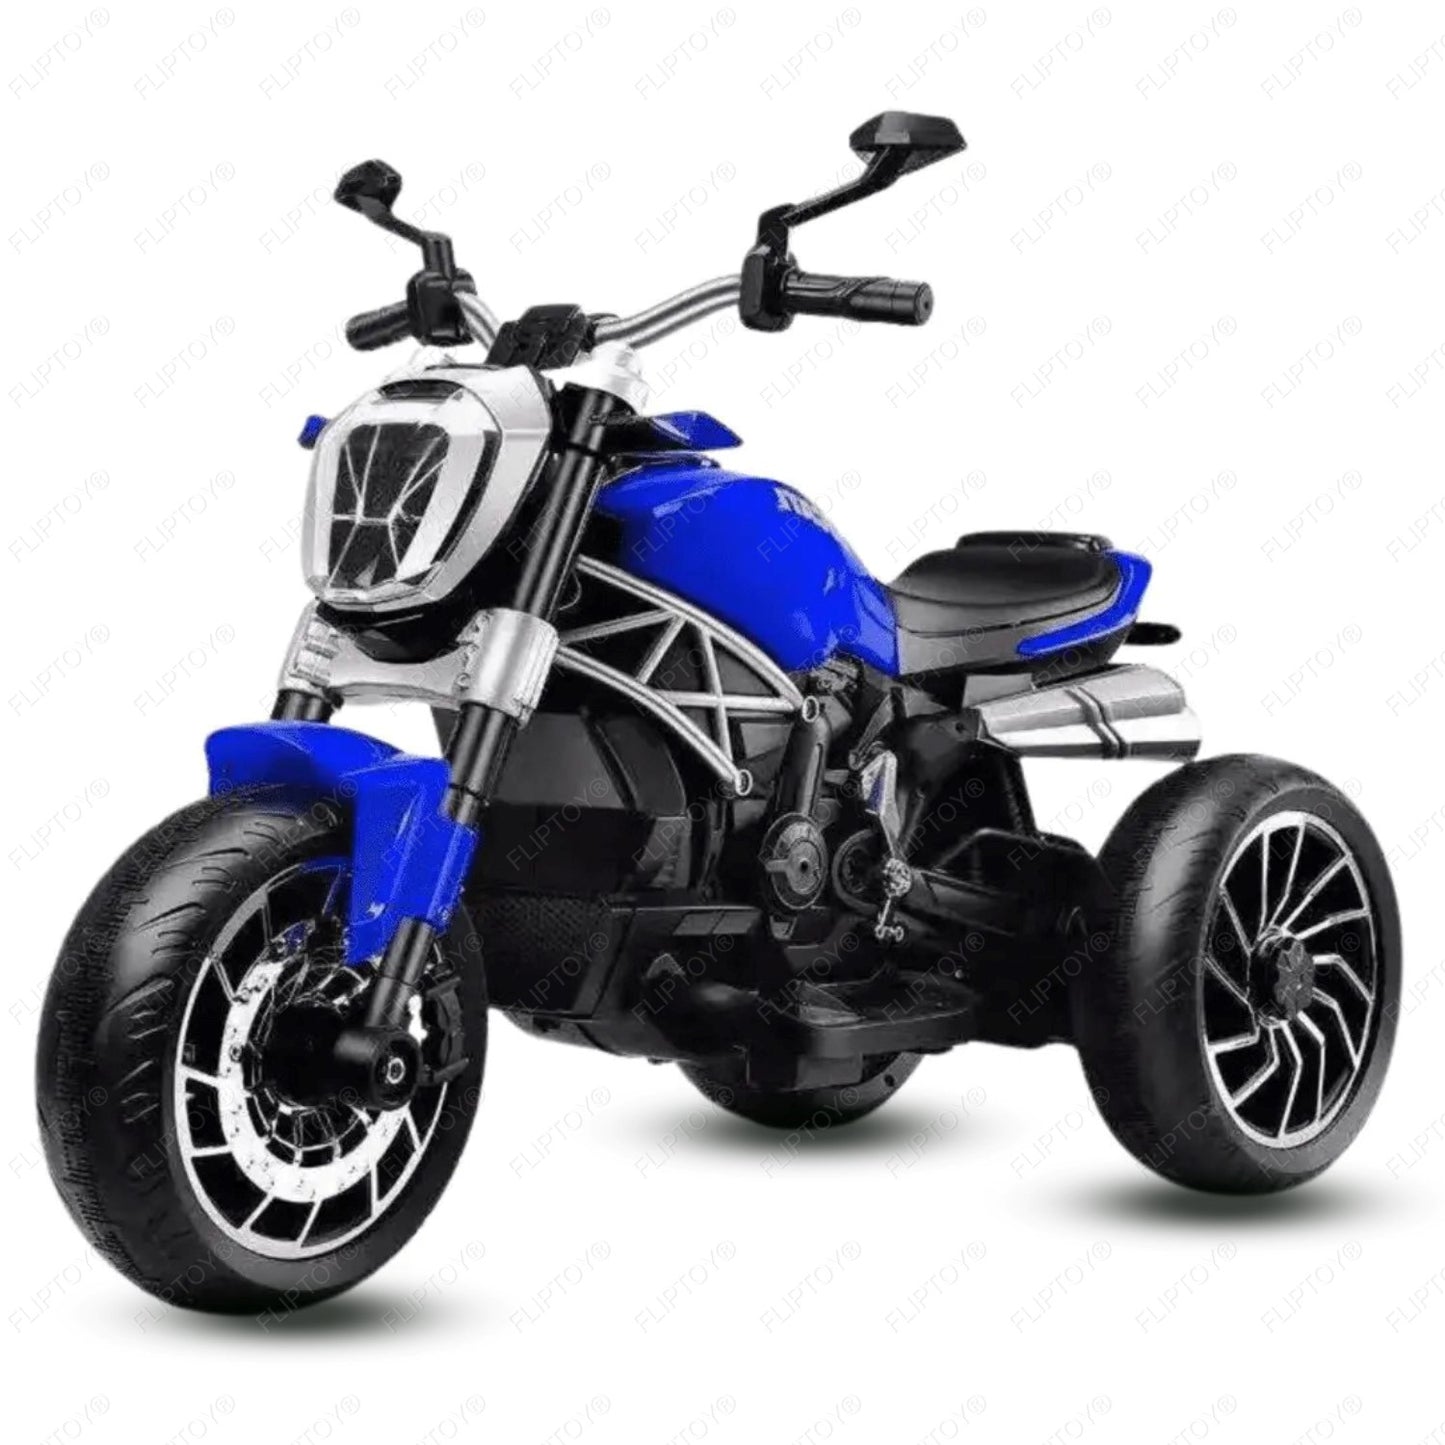 Fliptoy | Ride on Bike Model No. 8188 | Suitable for Kids Upto 3 to 7 Years old